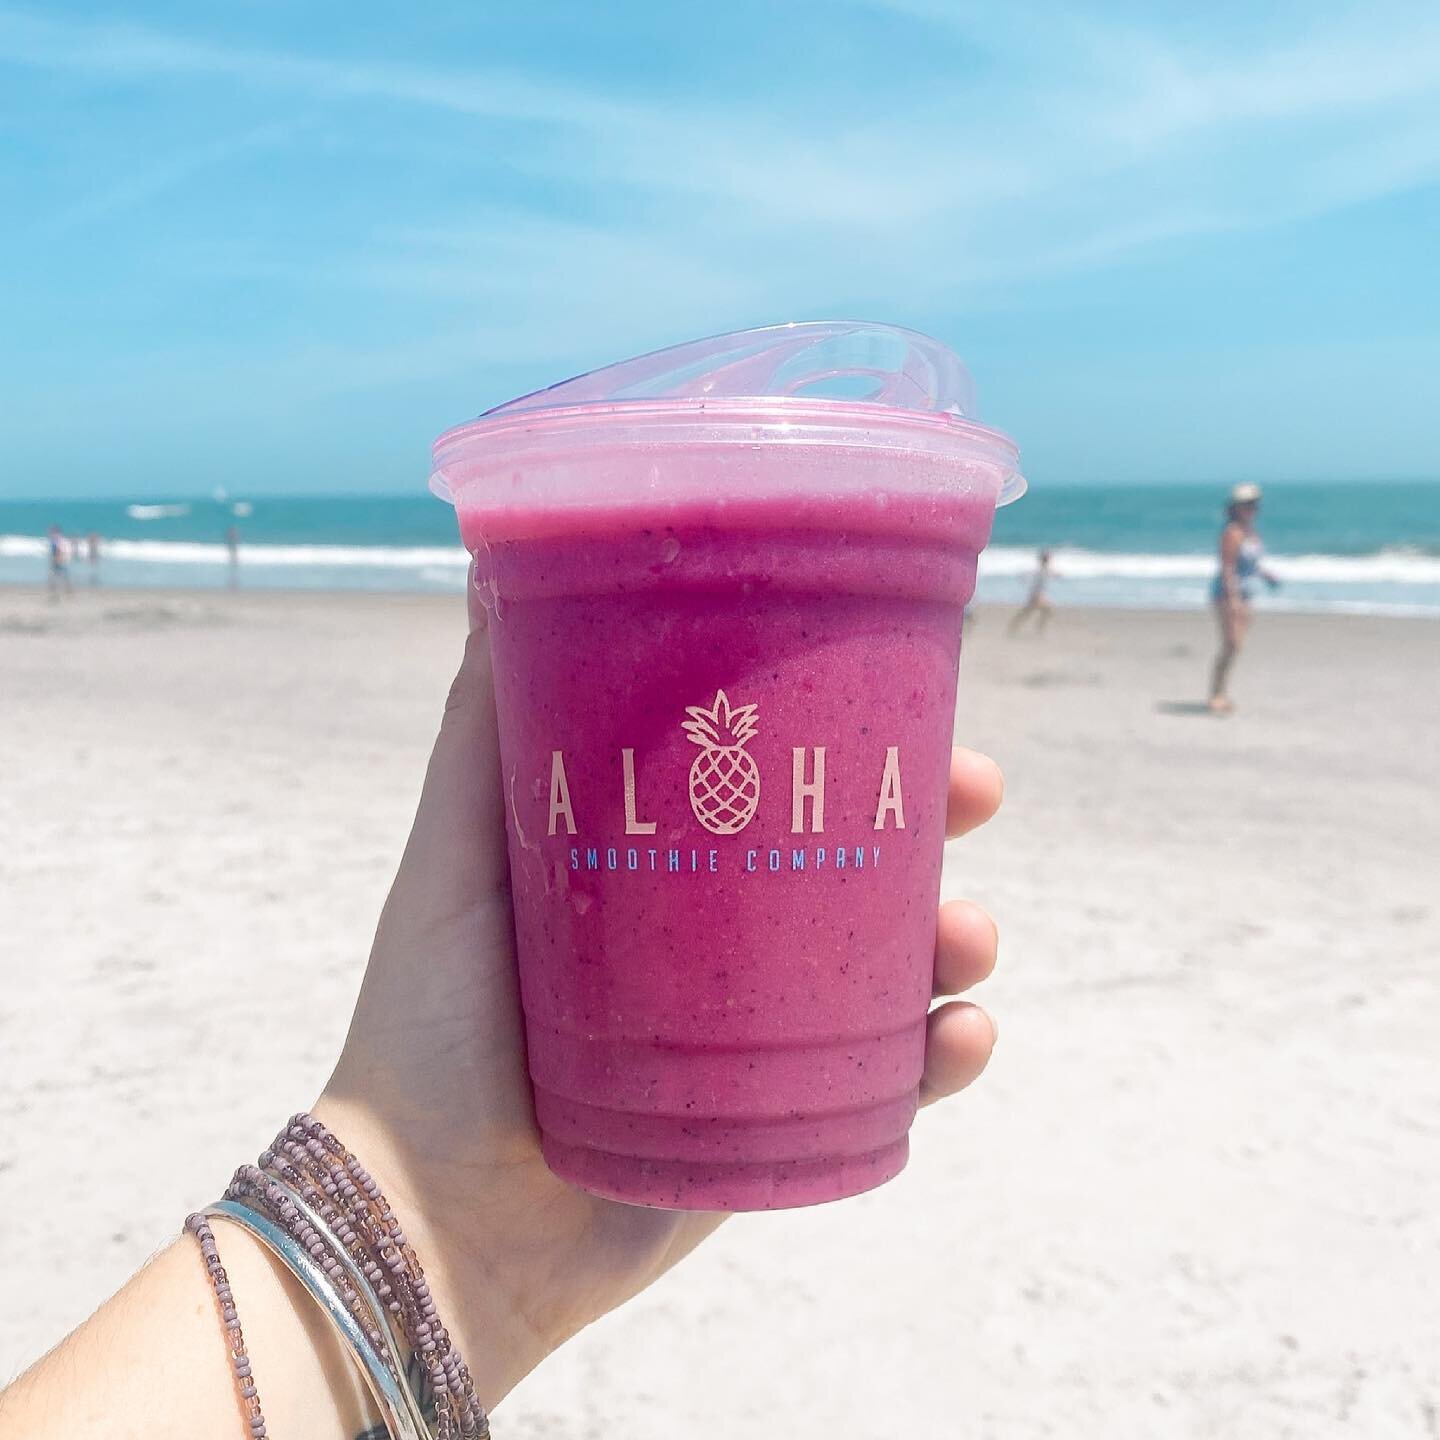 Jumping back into those early AM gym sessions or heading to the beach for a week?! ⁠
⁠
NOW OFFERING 🍍 'Ono To Go 🍍 ⁠
⁠
Order your favorite @alohasmoothiecoambler smoothie(s), in quantities of 4, in-store or under the 'Ono To Go' section via link in